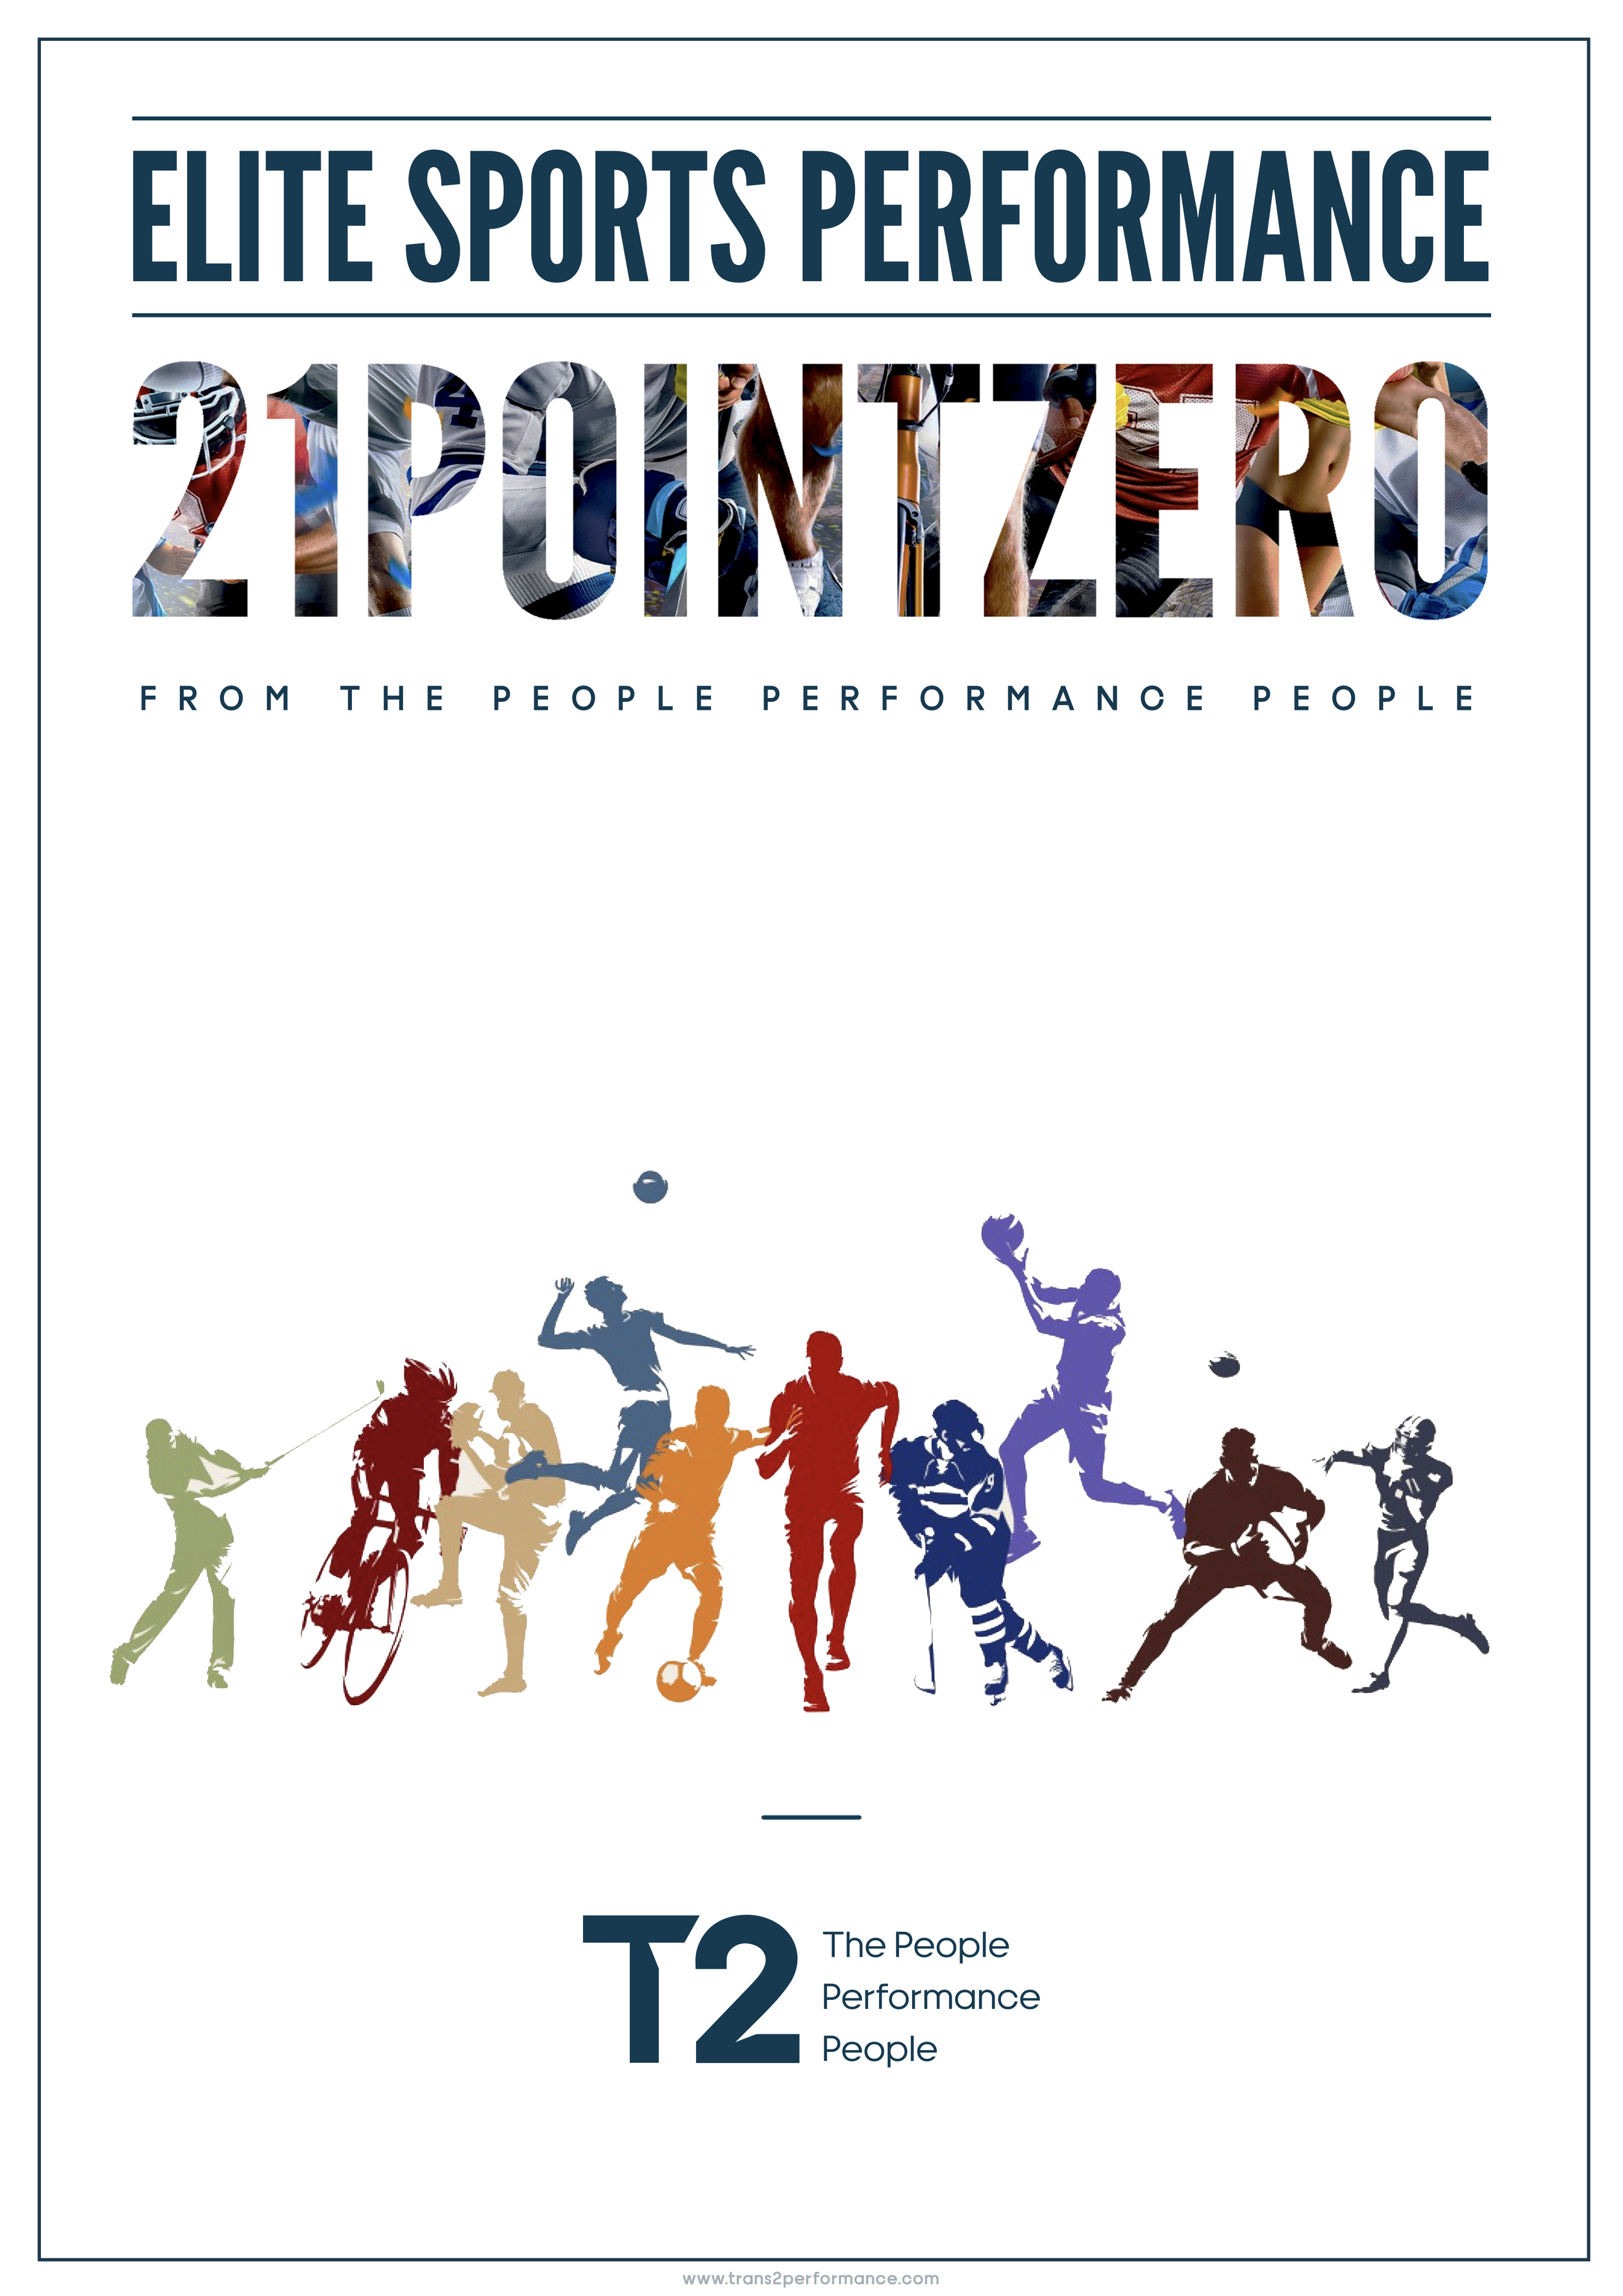 Programme 21PointZero- A holistic approach to achieving elite sports excellence_Page_35.png